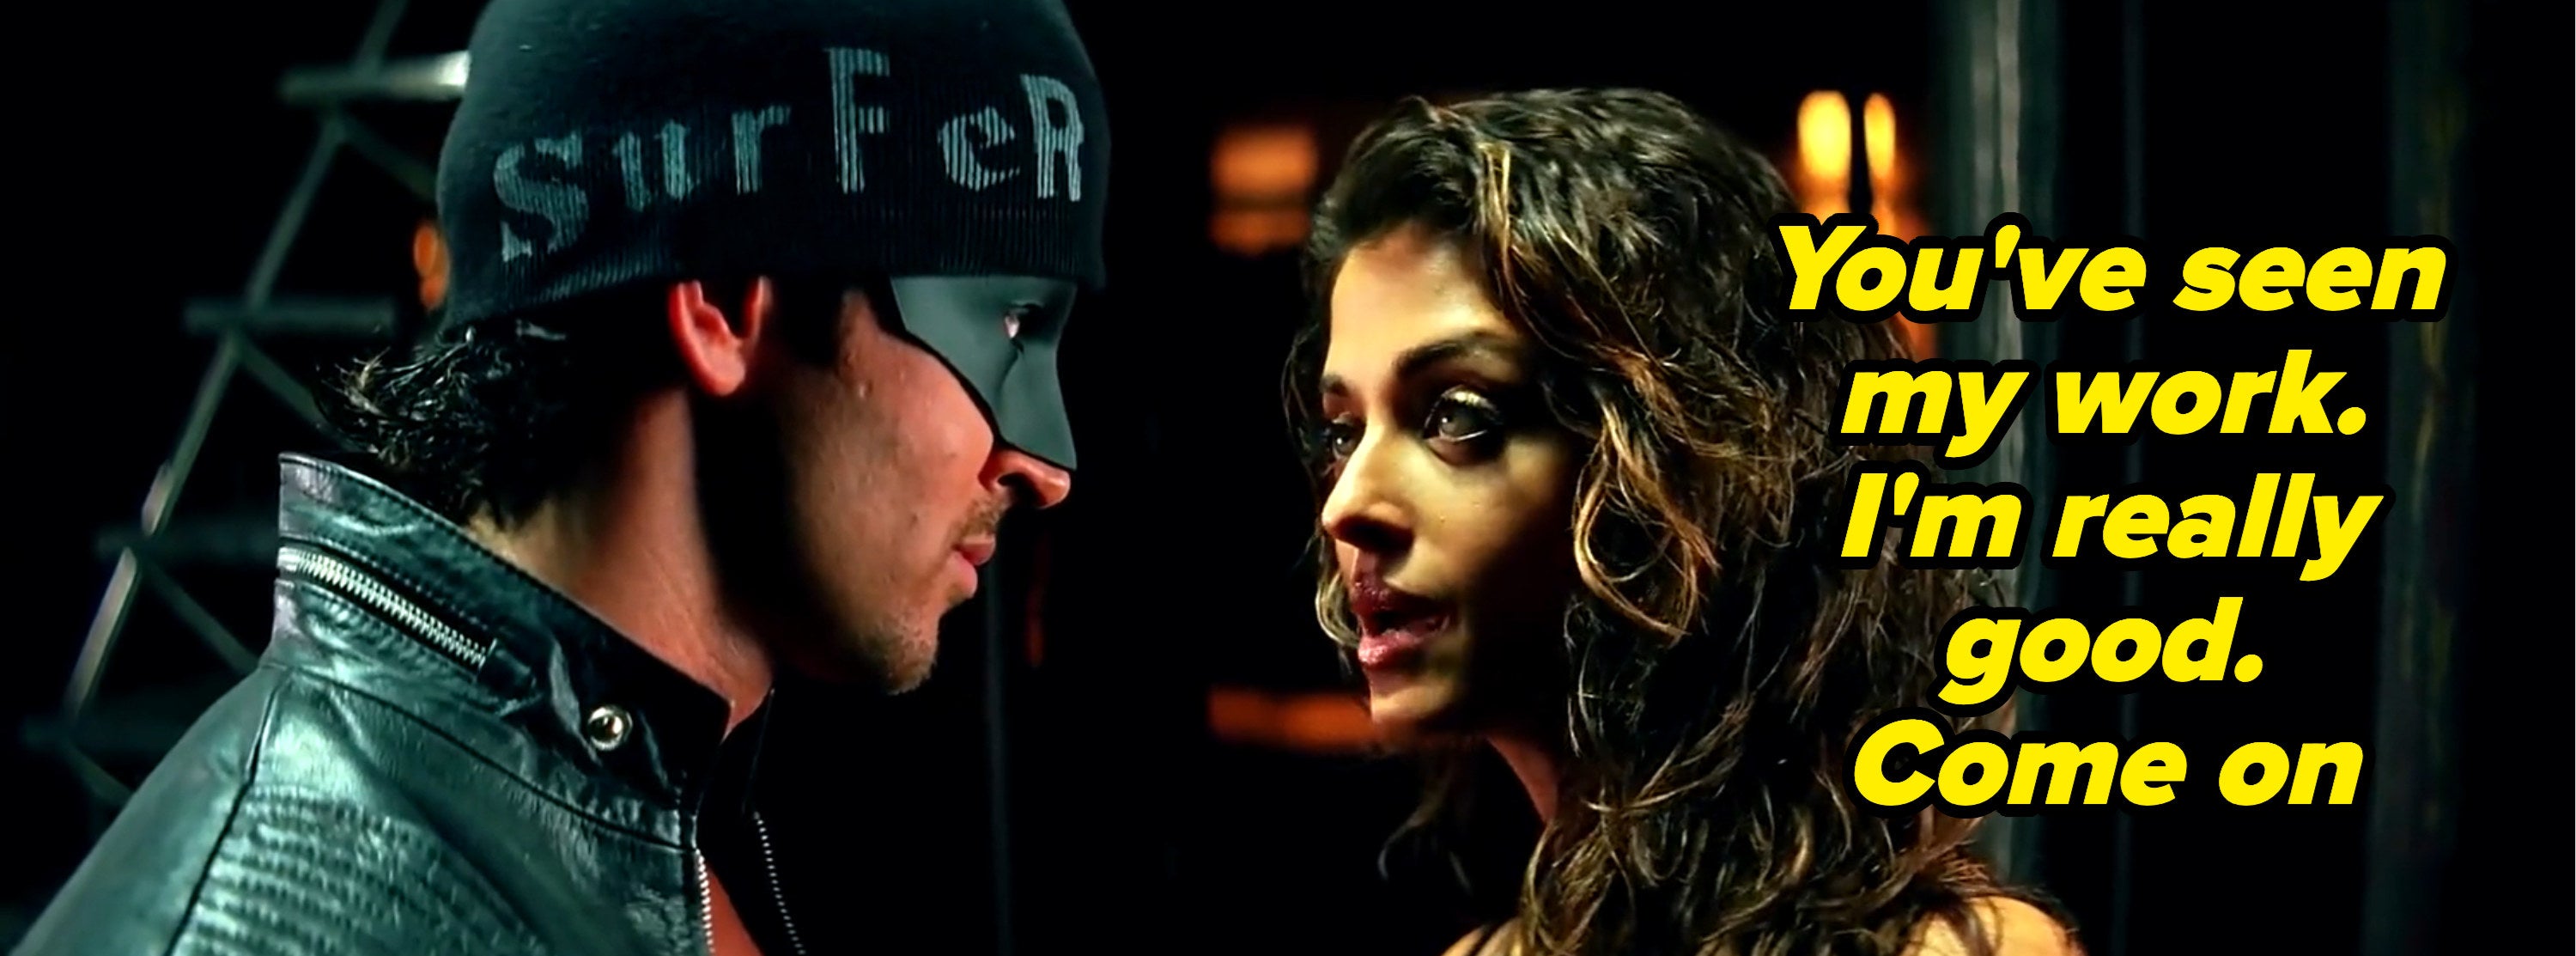 Aishwarya Rai and Hrithik Roshan converse while staring into each other&#x27;s eyes